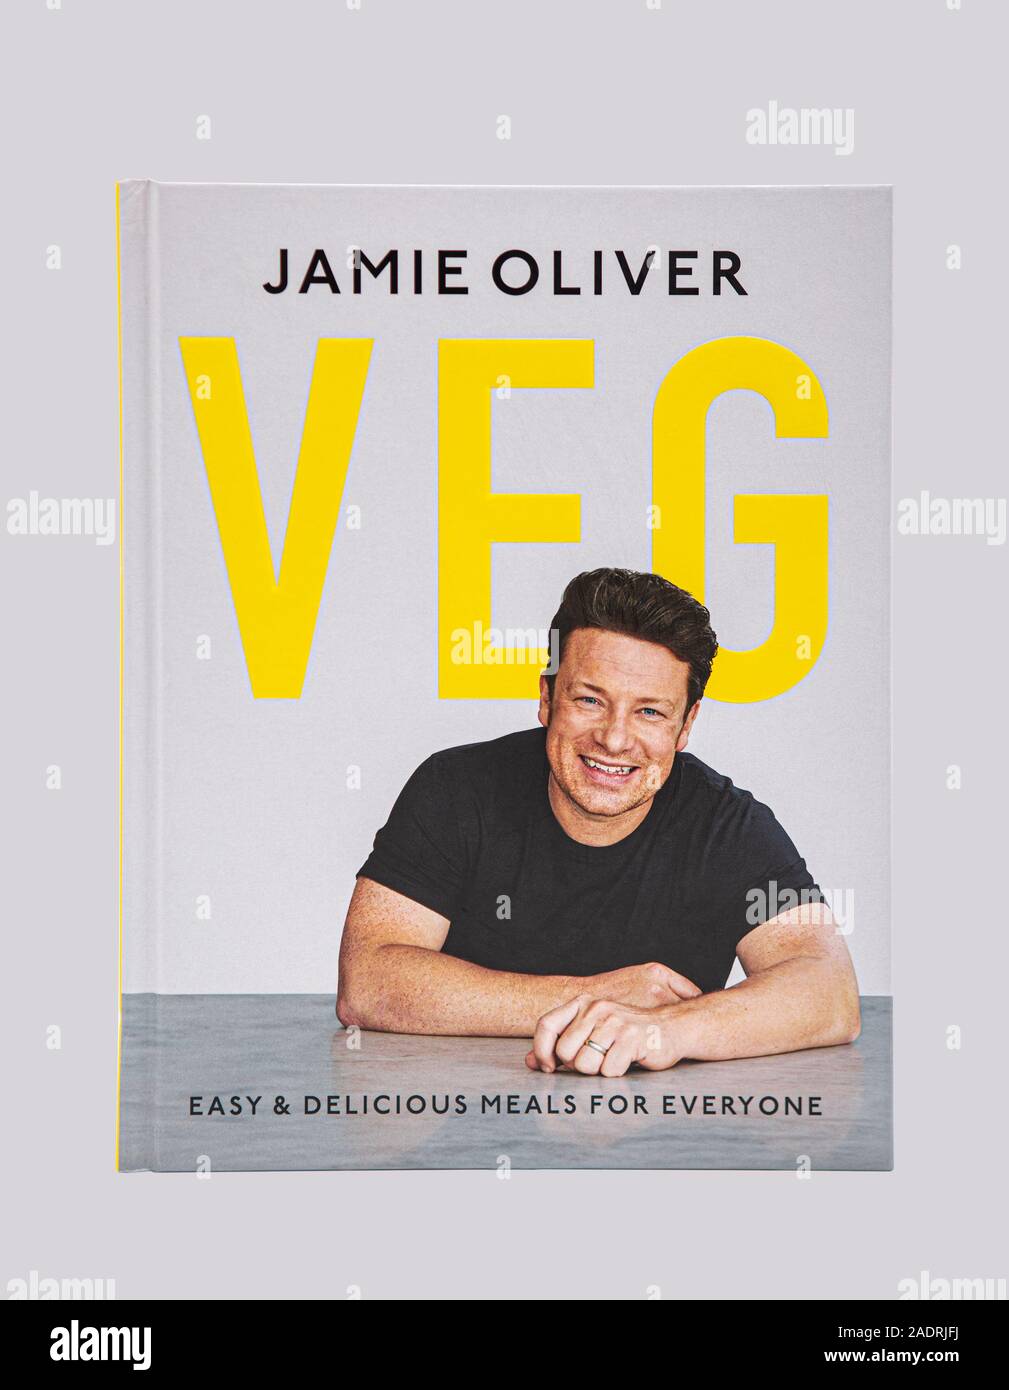 SWINDON, UK - NOVEMBER 25, 2019: Jamie Oliver Veg Cook Book, Easy and Delicious Meals for everyone on a light gray background. Stock Photo